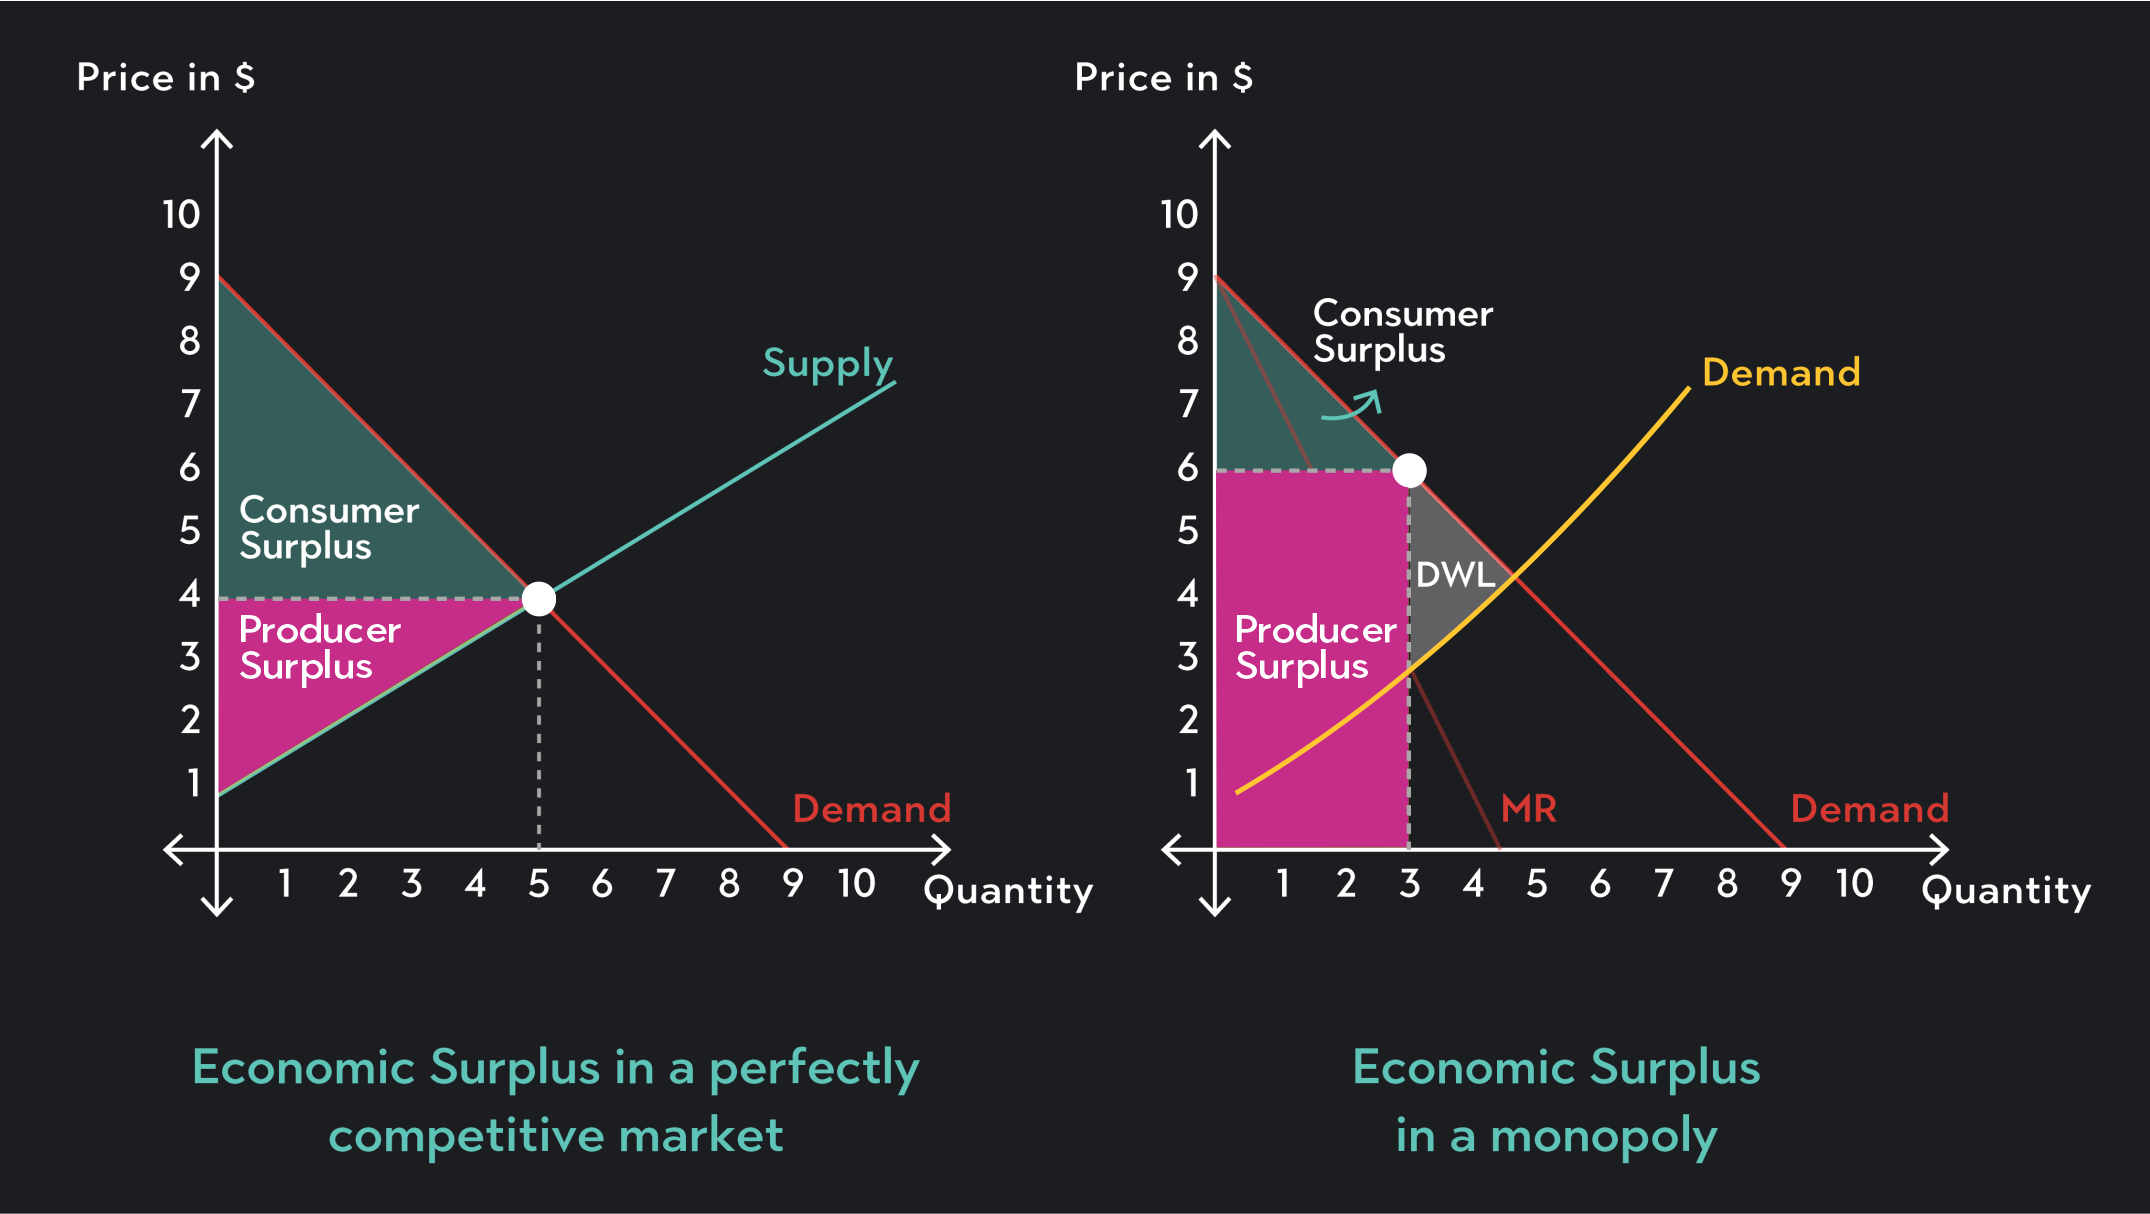 First graph shows  economic surplus in a perfectly competitive market. Second graph shows economic surplus in a monopoly.